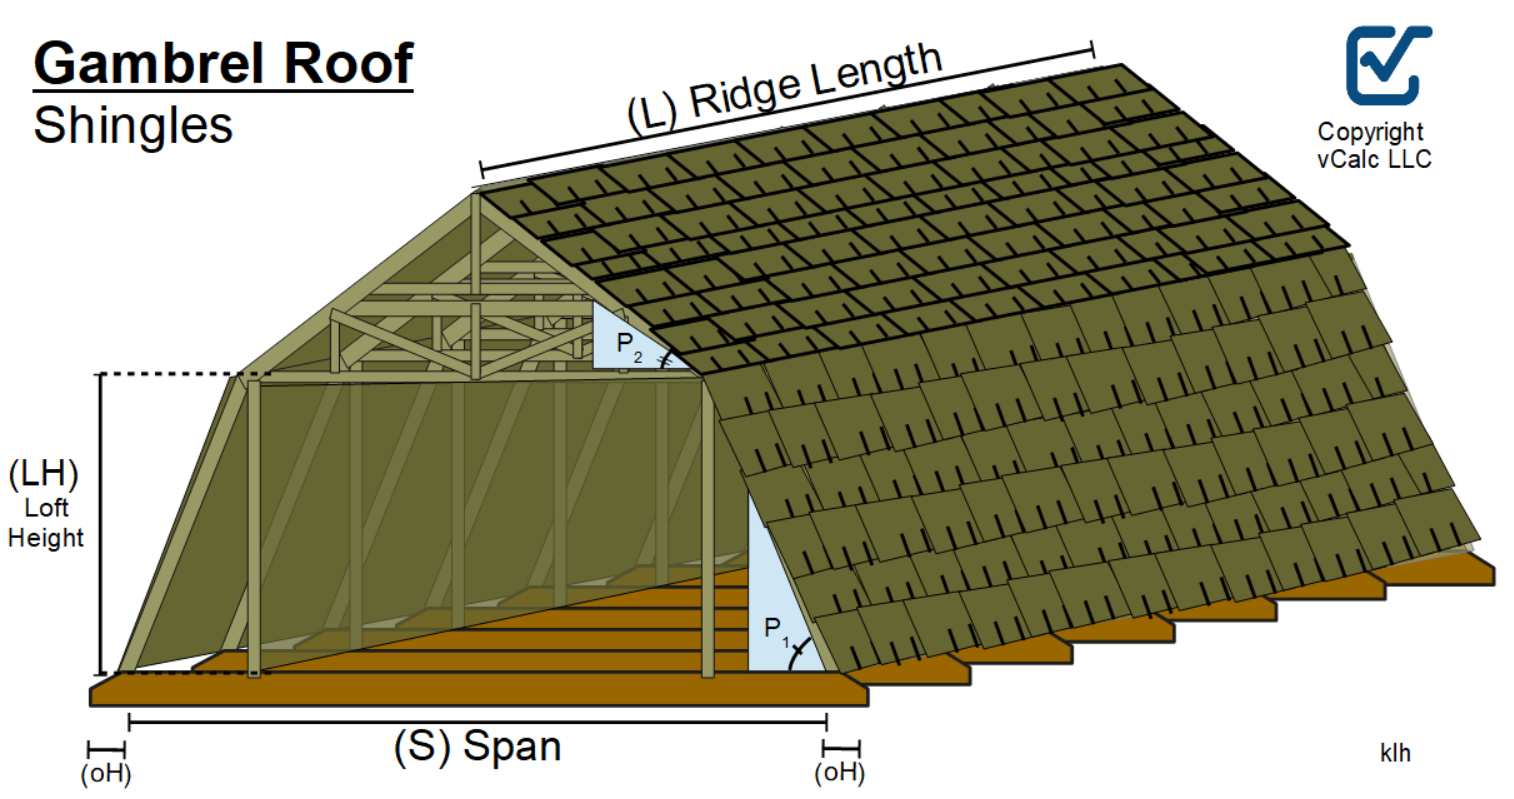 Gambrel Roof with Shingles